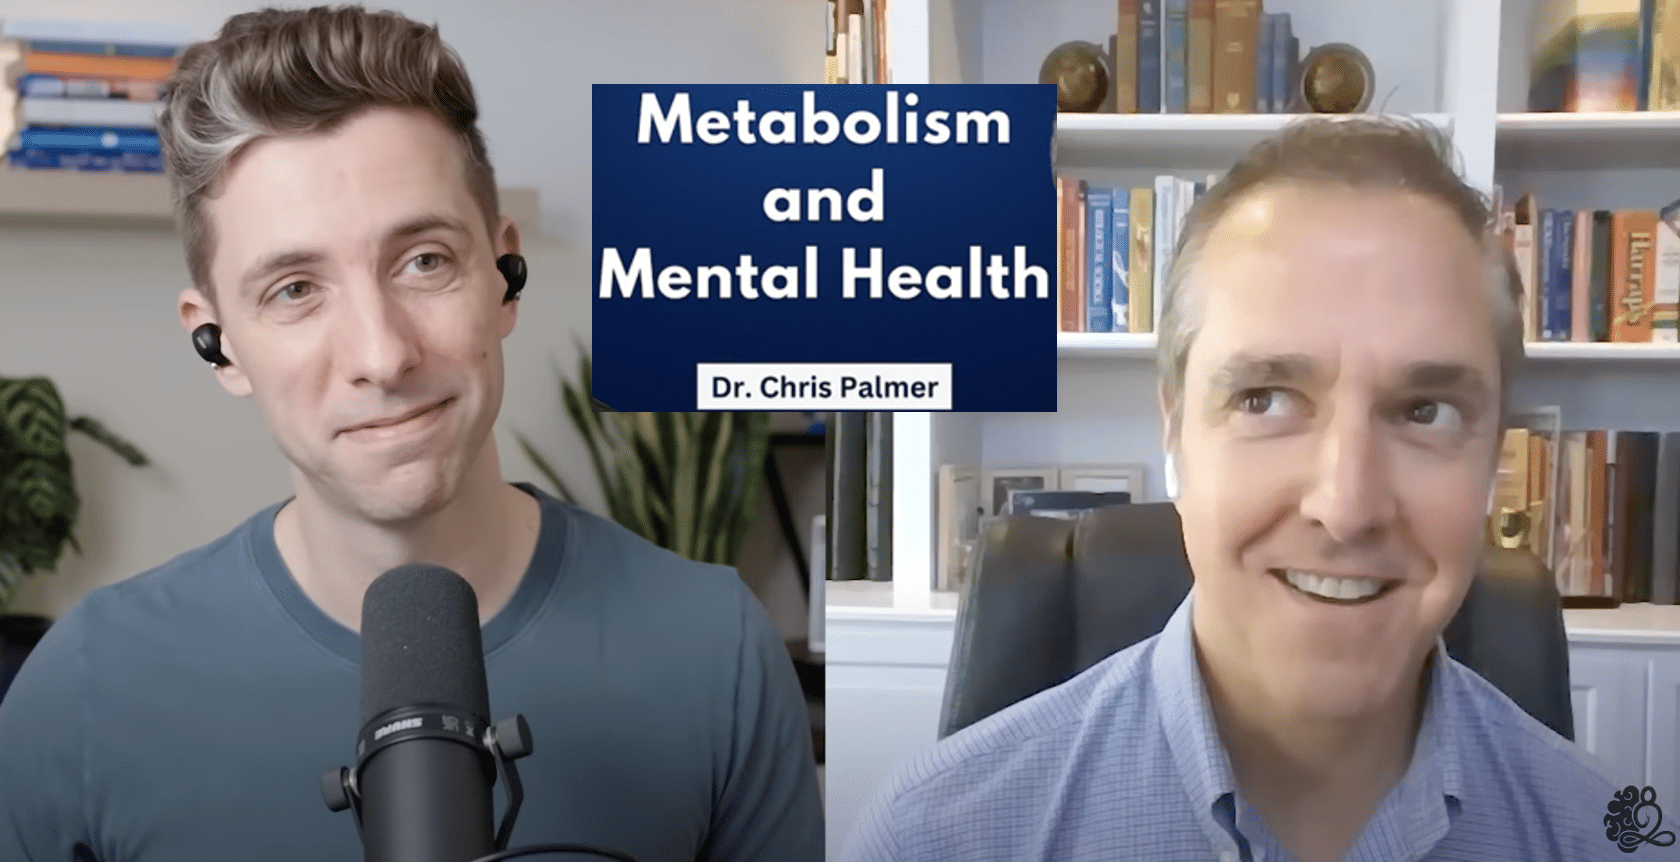 Metabolism, Brain Energy, and Mental Health with Dr. Chris Palmer | Being Well Podcast, Forrest Hanson